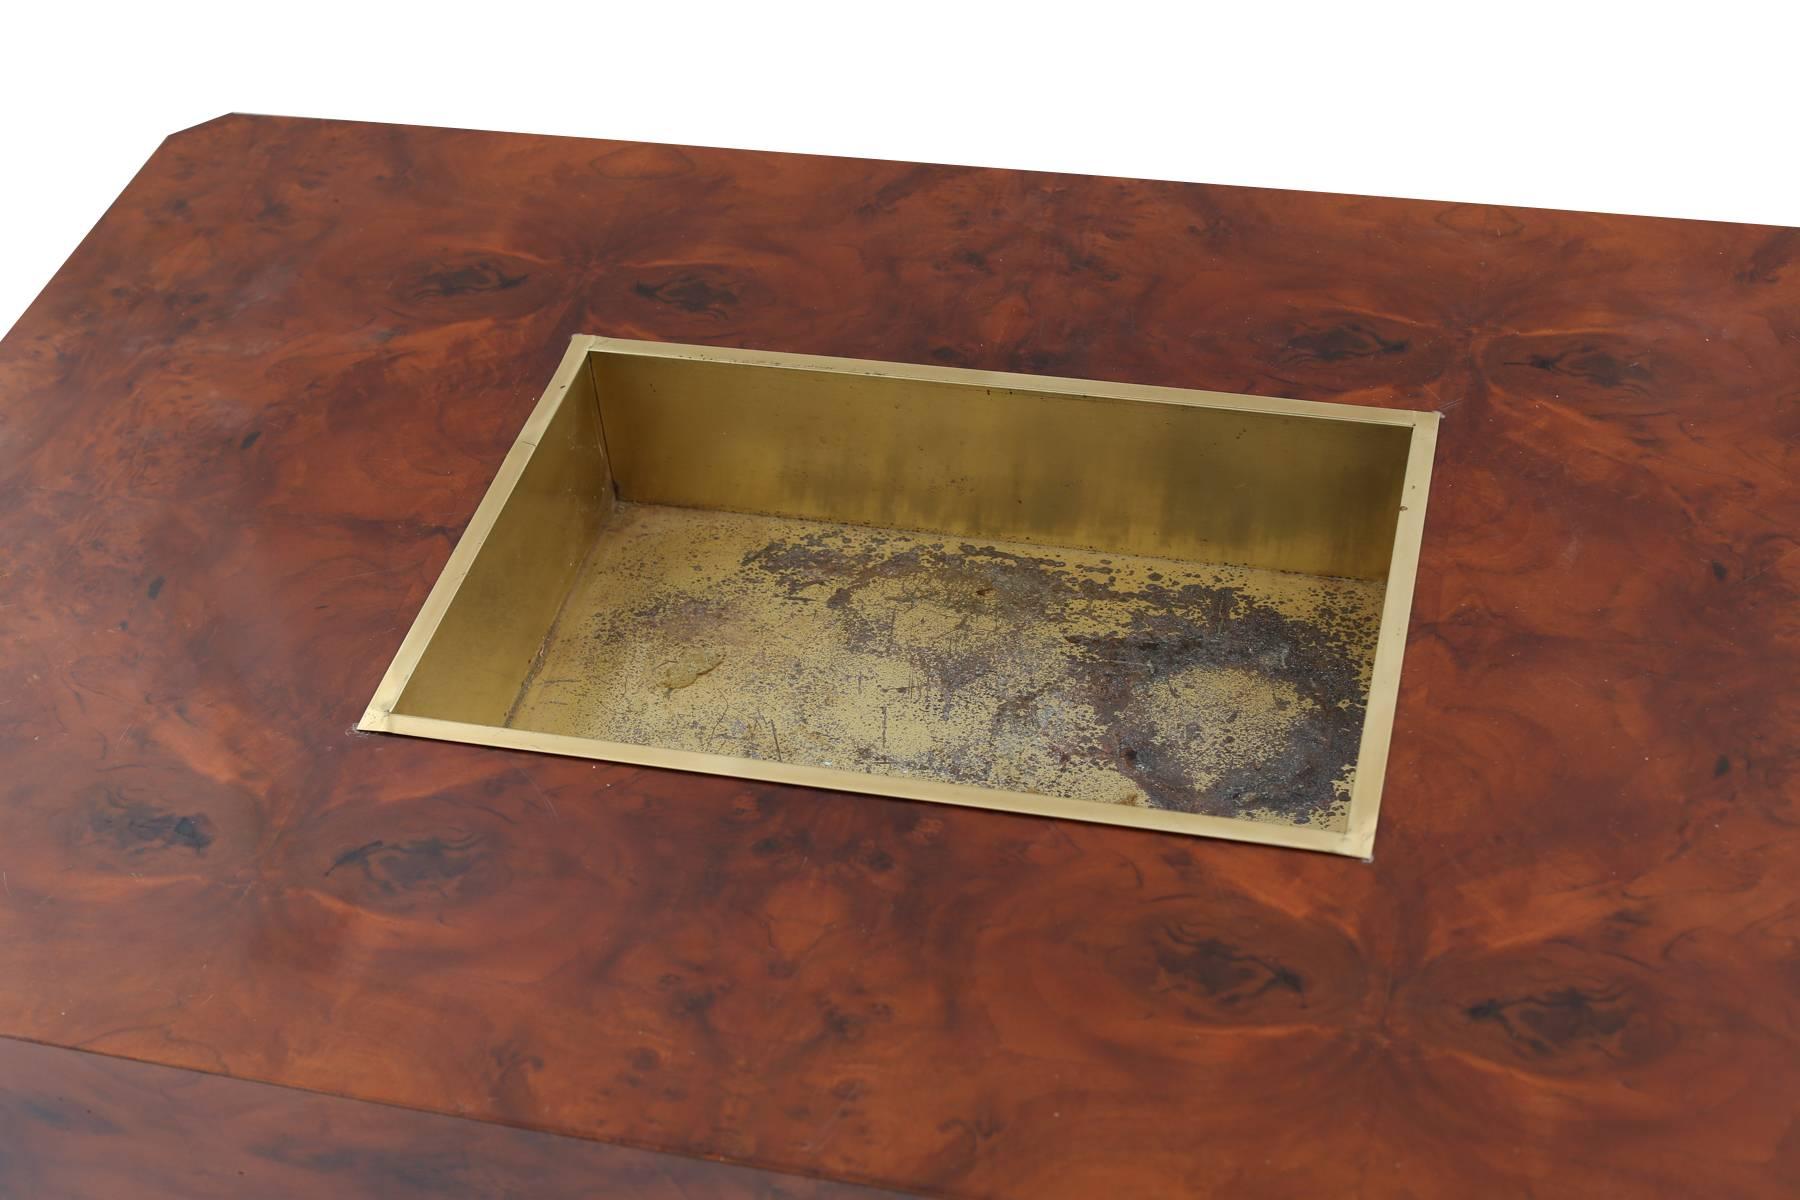 Willy Rizzo burl and patinated brass cocktail table, circa early 1970s. This all original example has a beautifully grained burl top and inset plinth base. It has architecturally formed brass corners and inset brass tray. Has age appropriate wear on